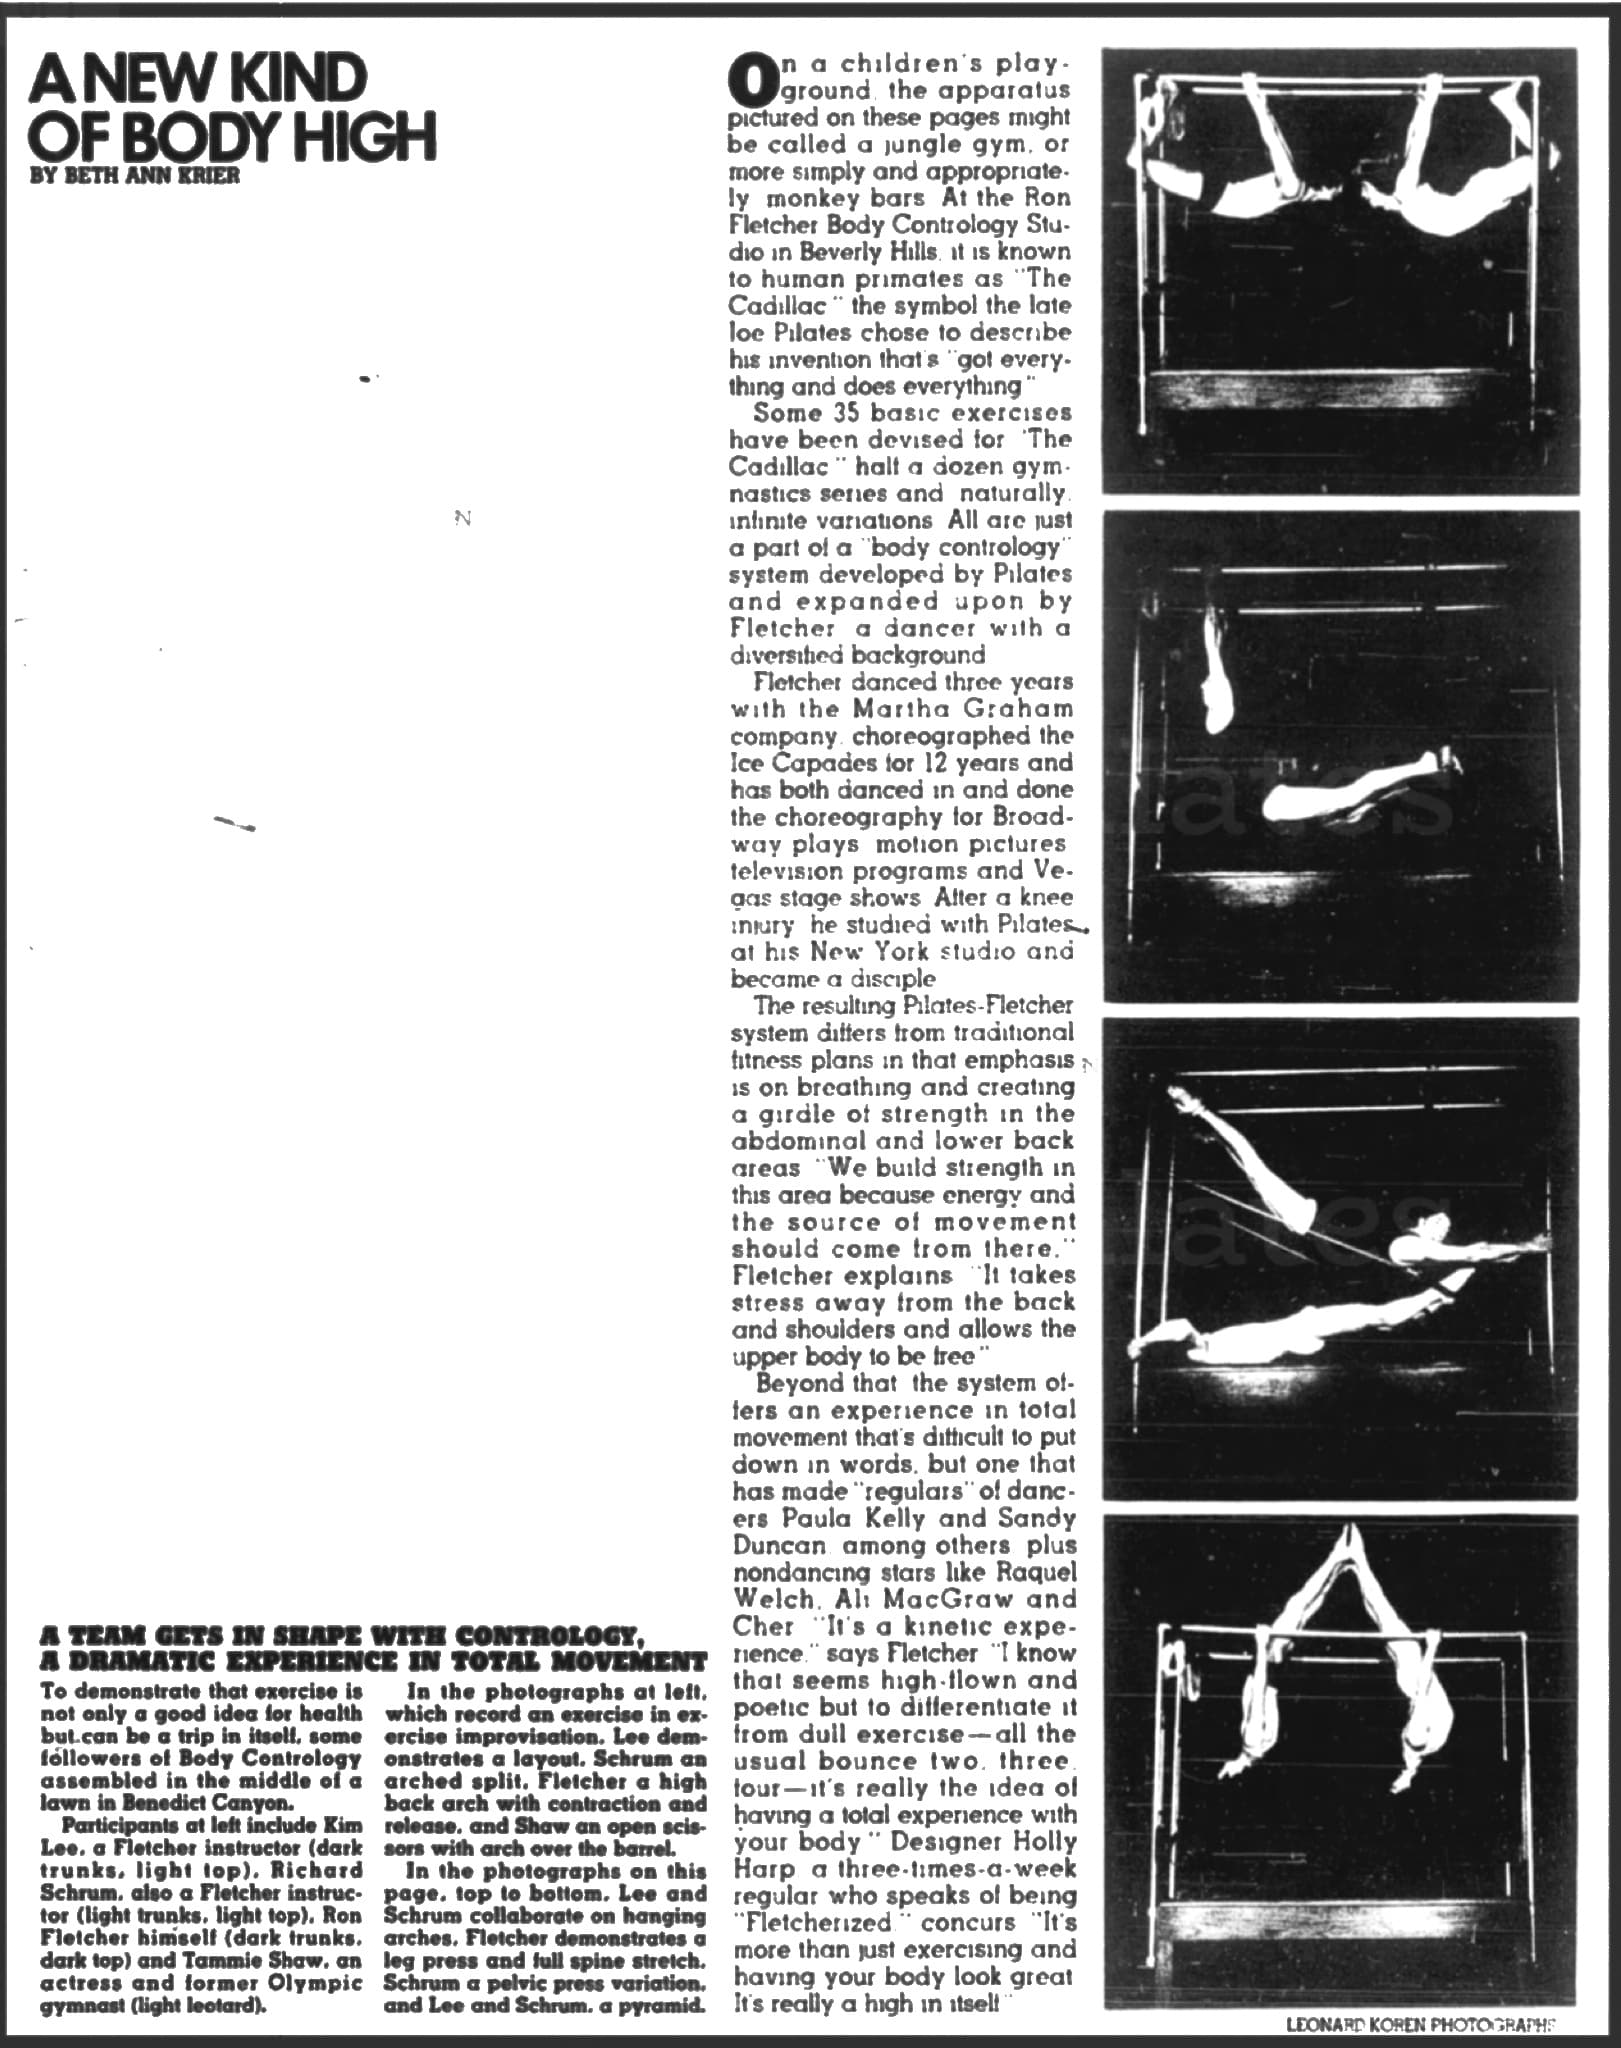 Ron Fletcher archive article "A New Kind of Body High"